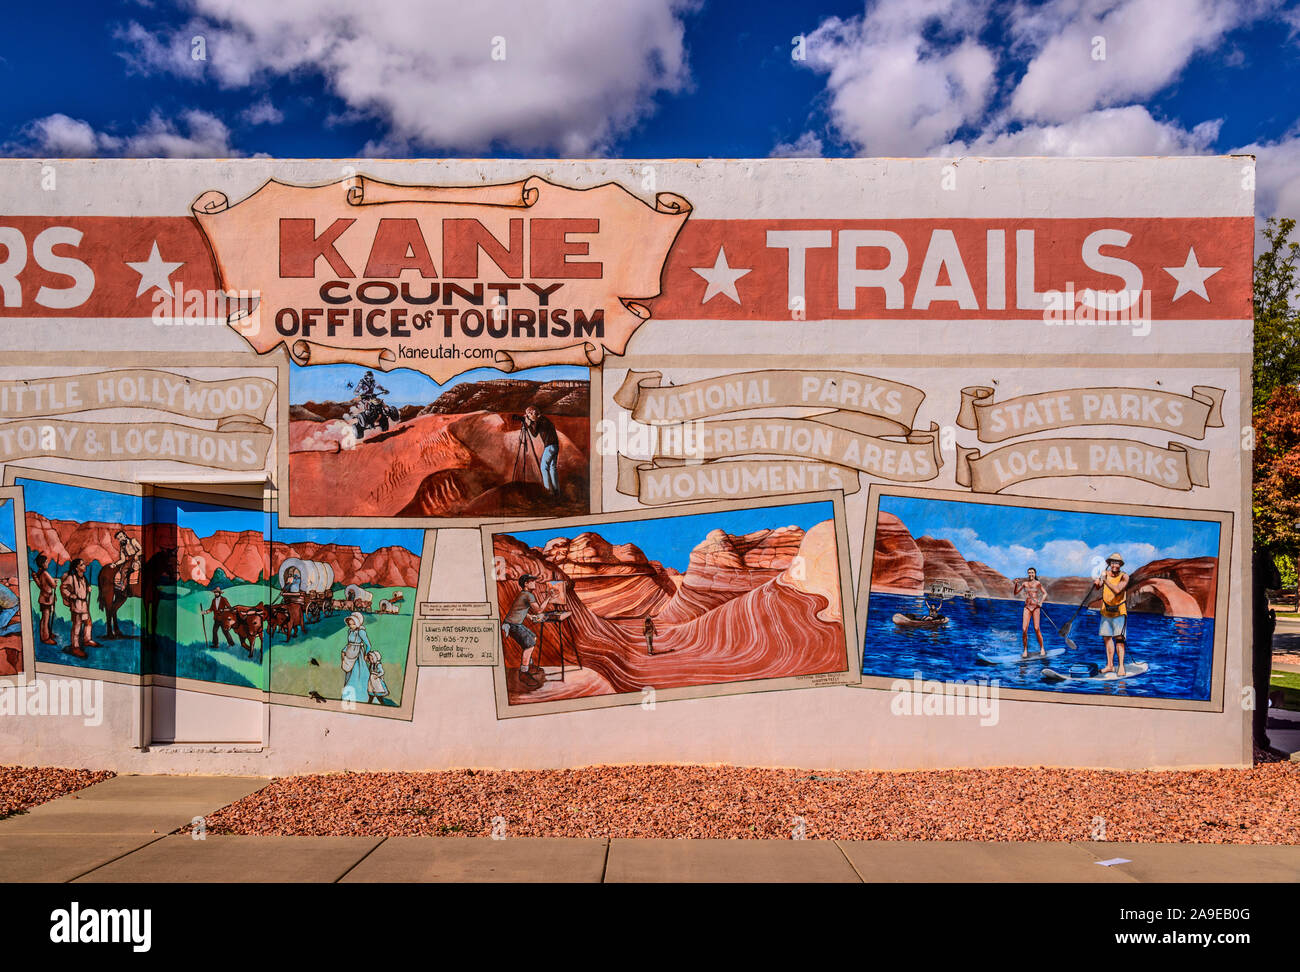 The USA, Utah, Kane County, Kanab, office of Tourism, wall painting, places of interest, top advertisements Stock Photo